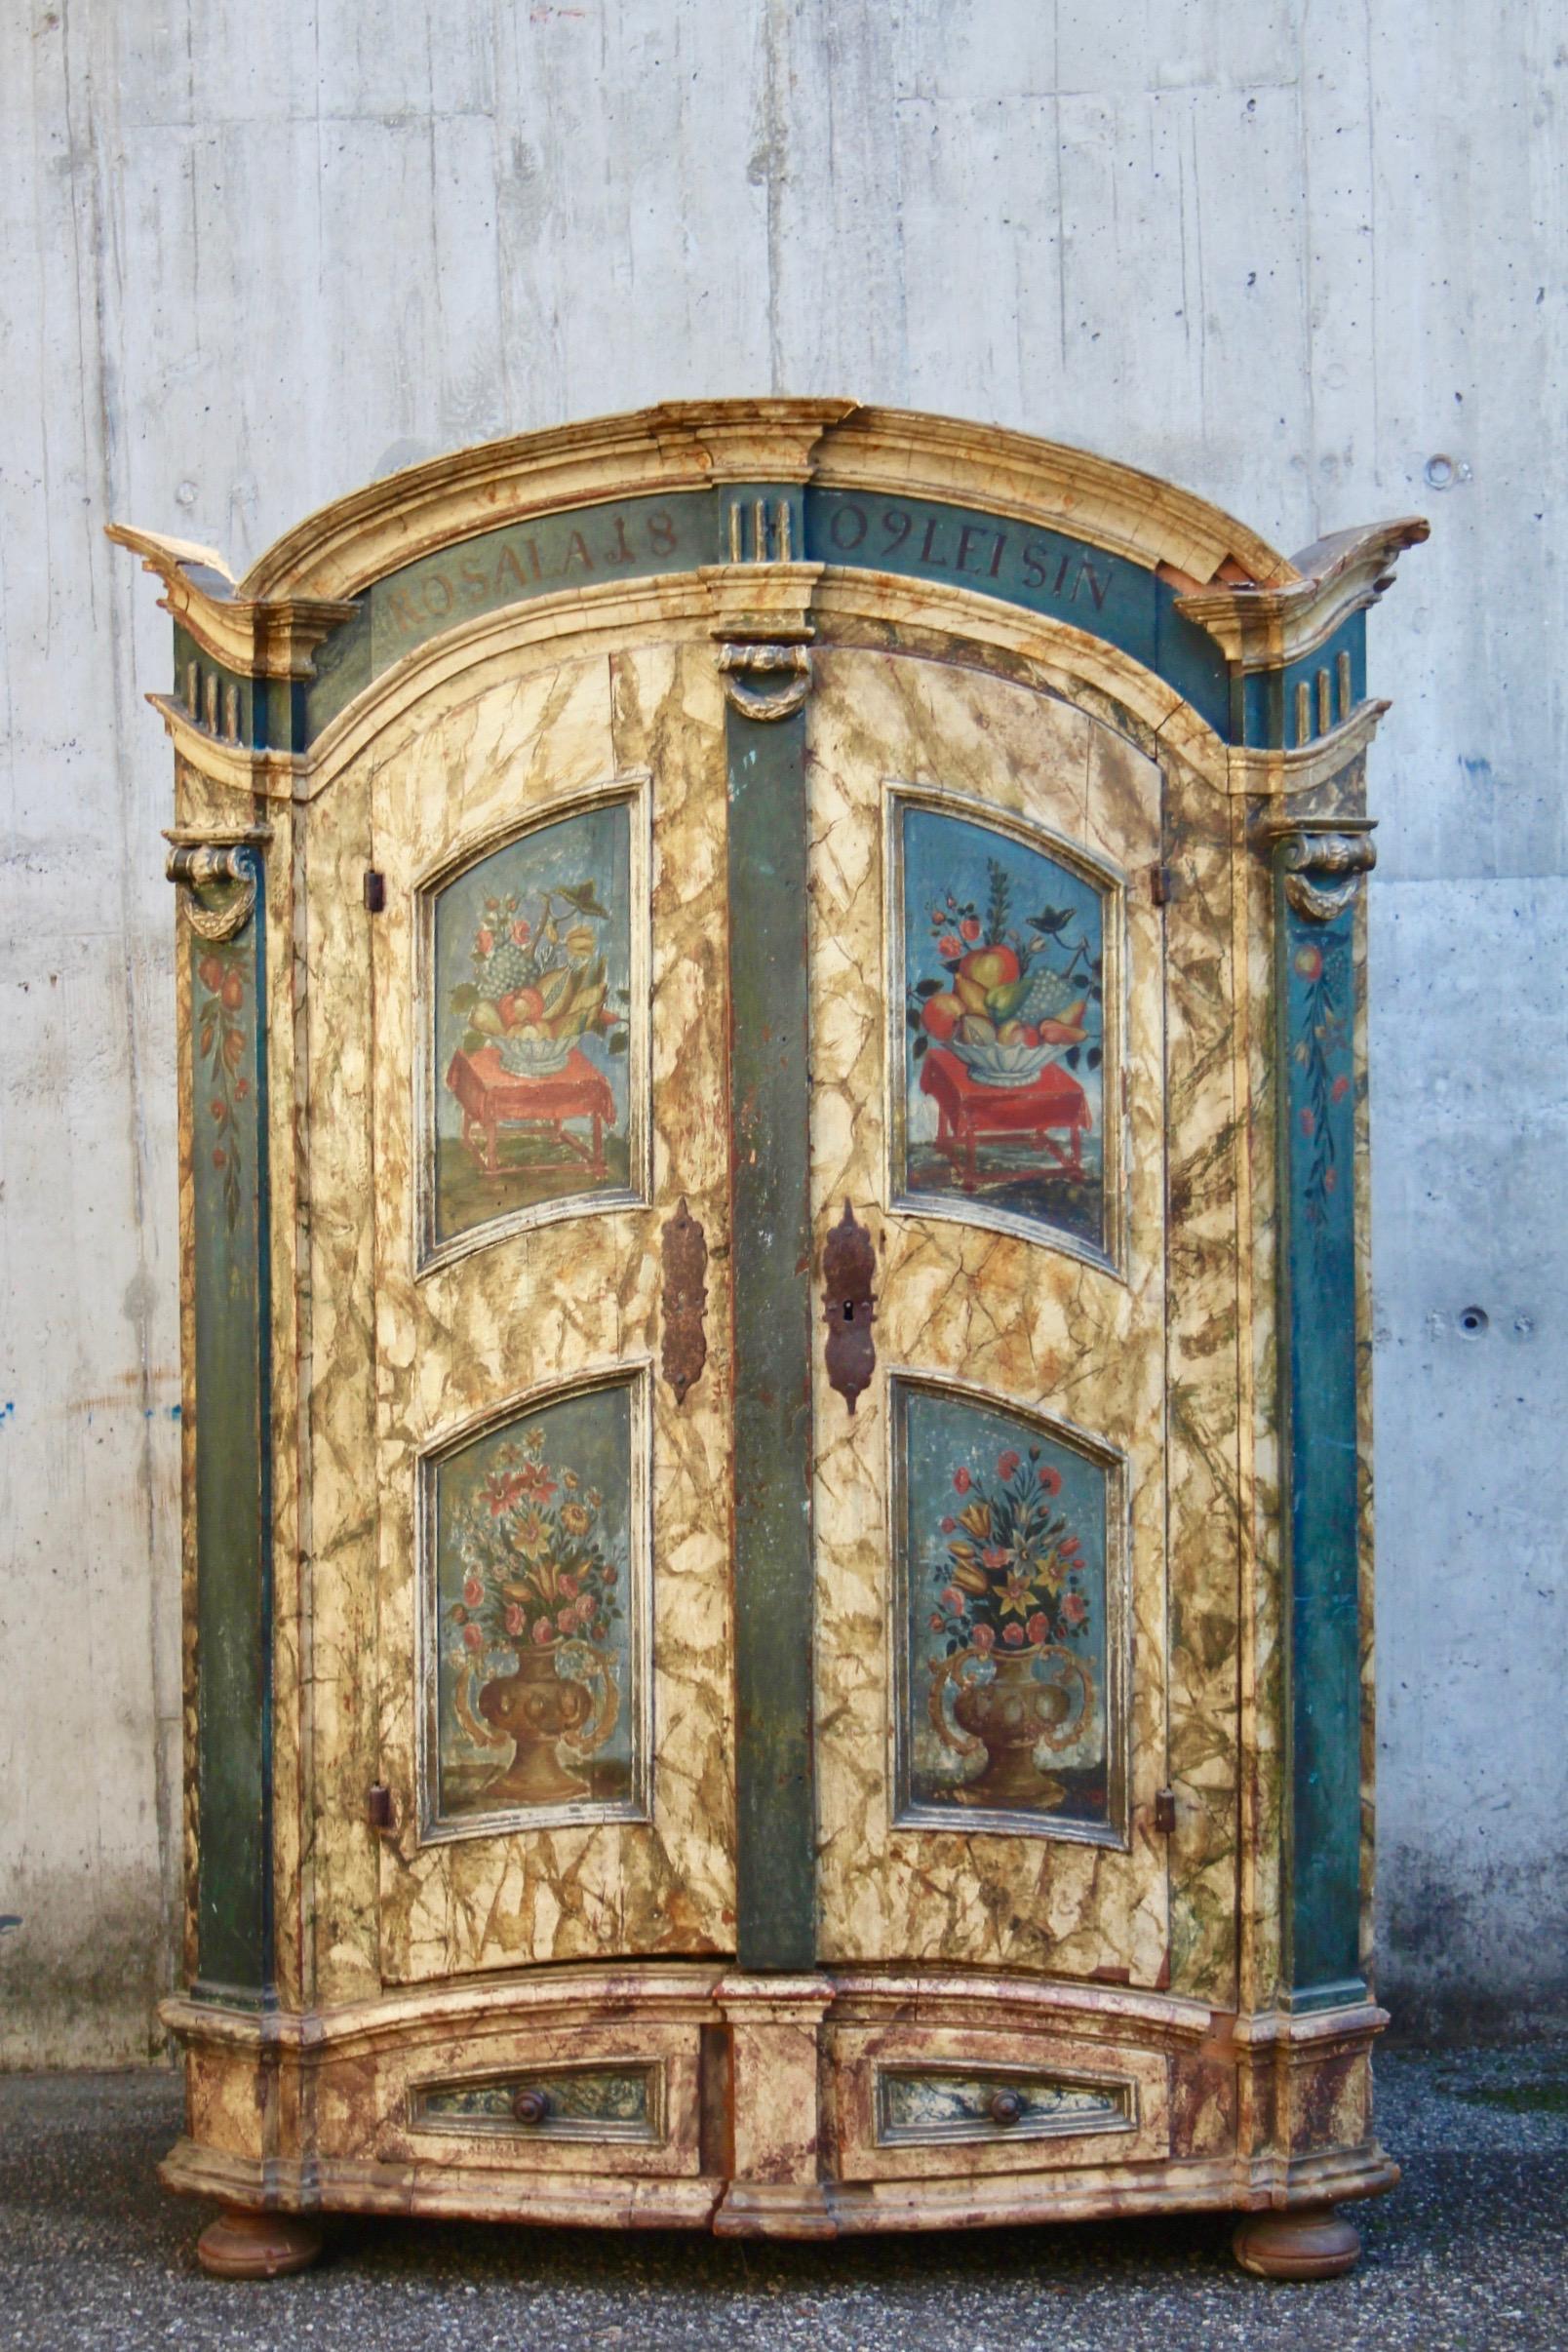 Swiss alp painted cupboard dated 1809 Rosalia Leisin with a very beautiful lock probably from the 18th century, there are two drawers at the bottom, in the center and a small drawer inside, the paint imitates marble and vases of flowers.